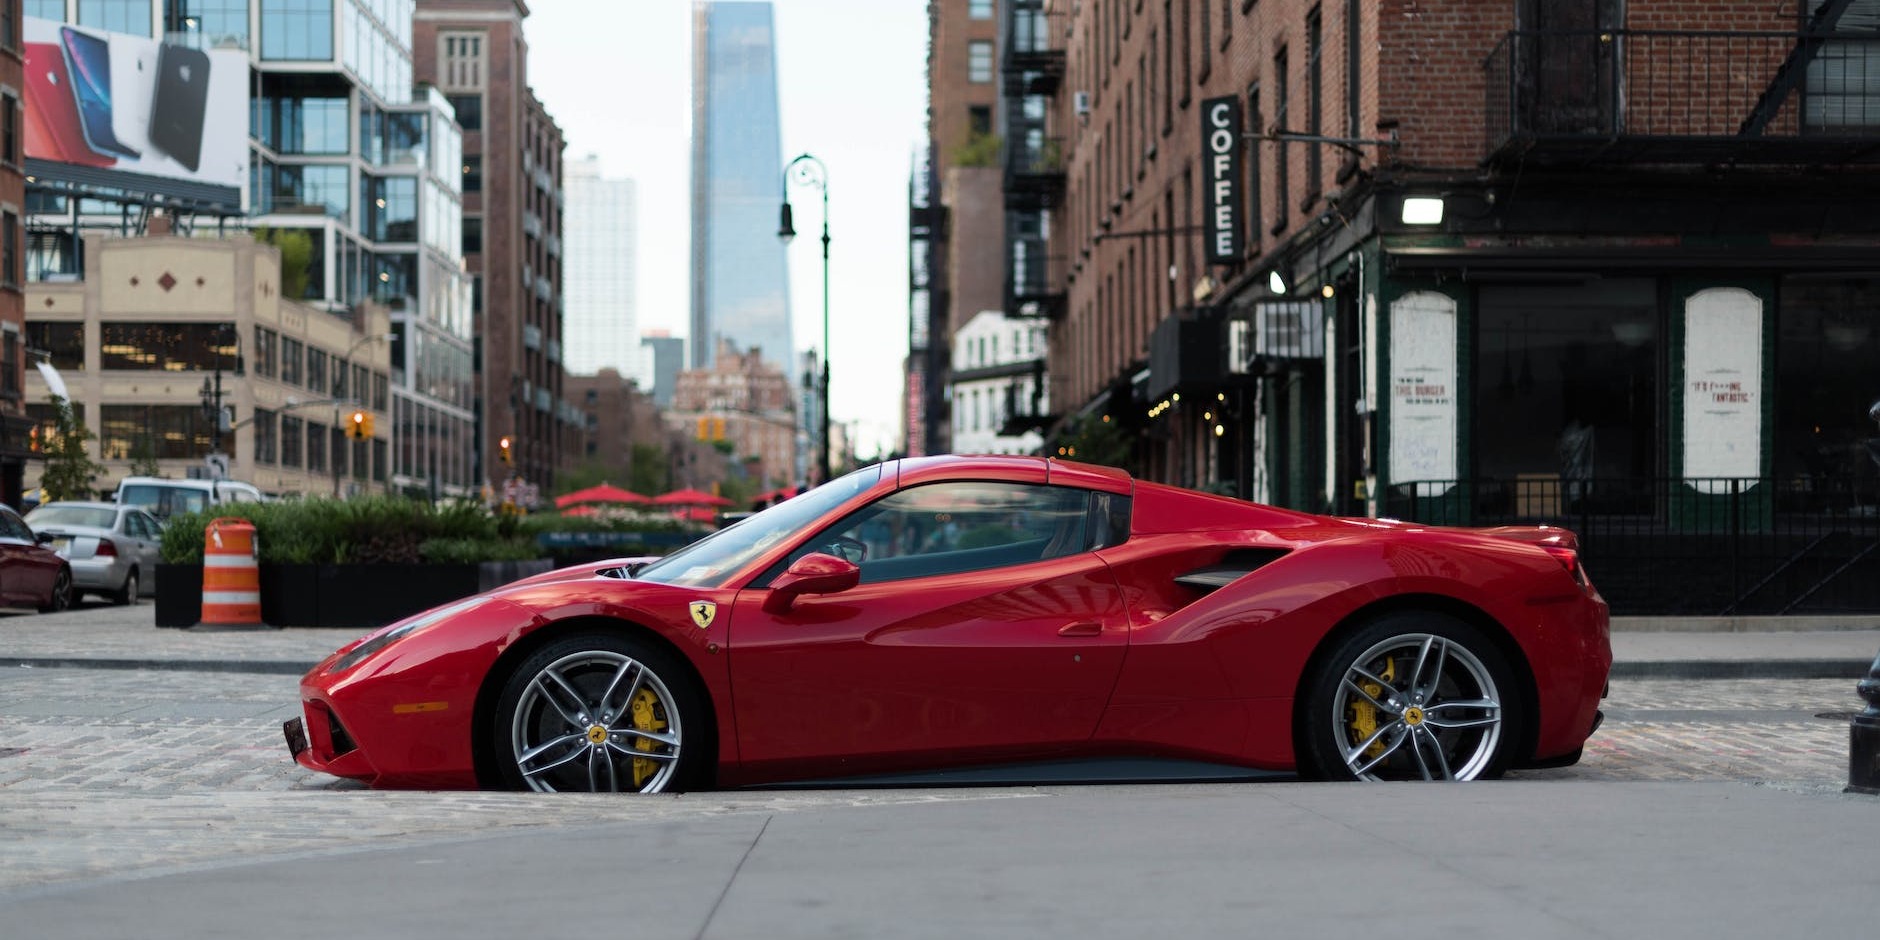 How Much Does It Cost to Rent a Ferrari in the UK